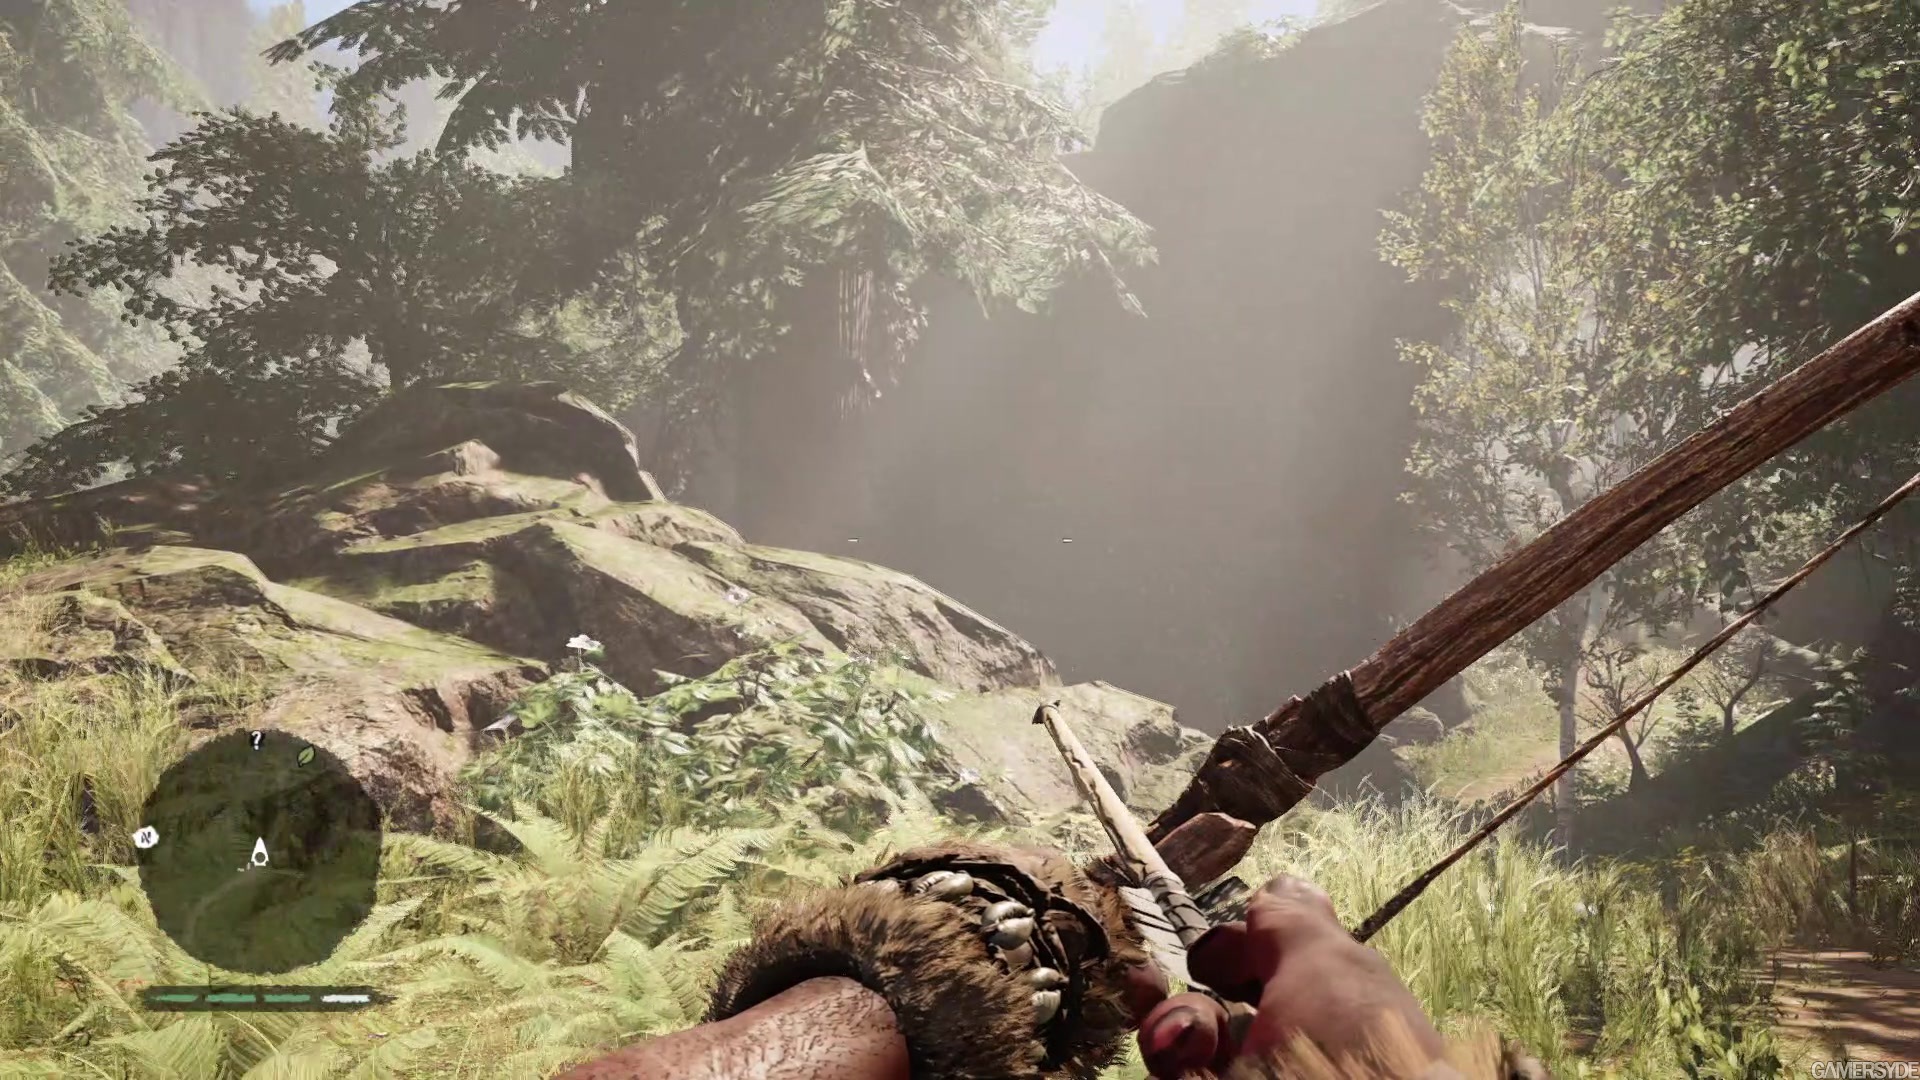 far-cry-primal-gameplay-walkthrough-1-high-quality-stream-and-download-gamersyde